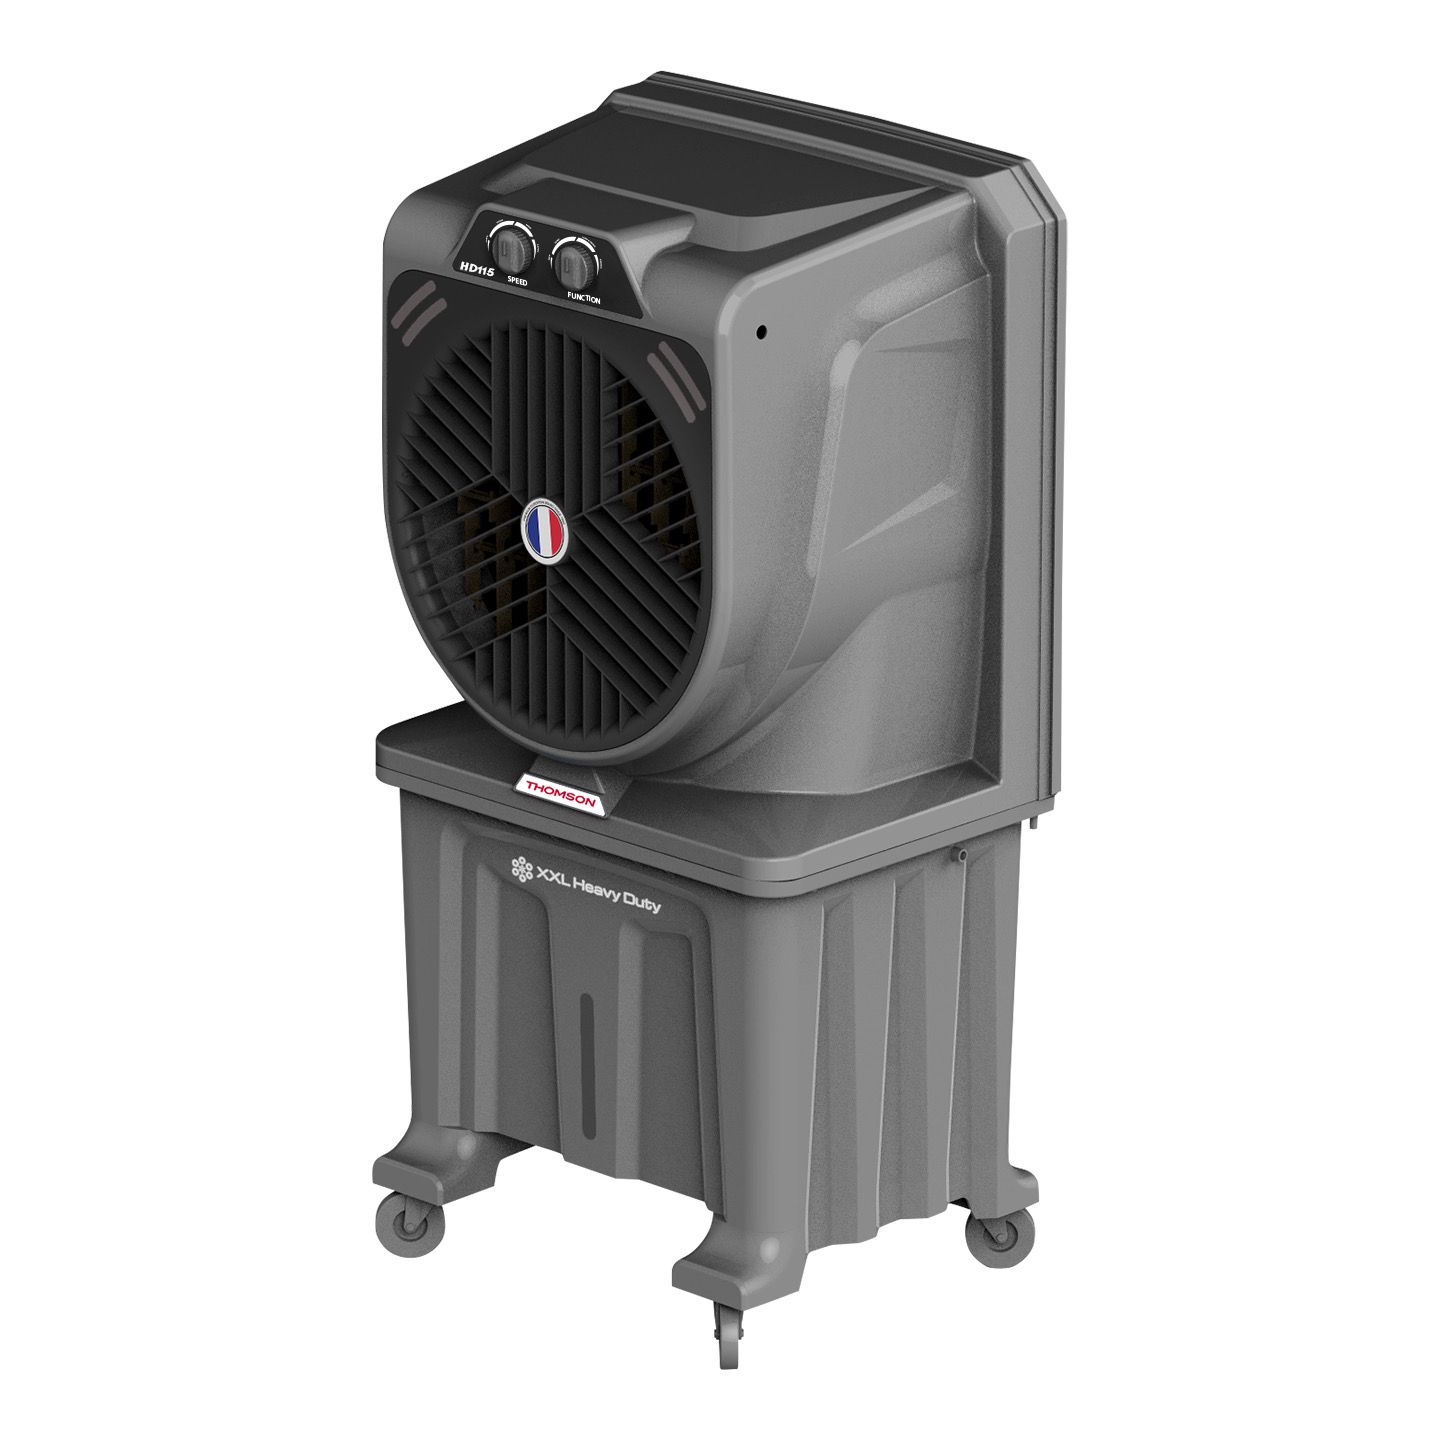 THOMSON Launches an Exclusive Range of Air Coolers in India Featuring Innovative Designs Powered by BLDC Technology